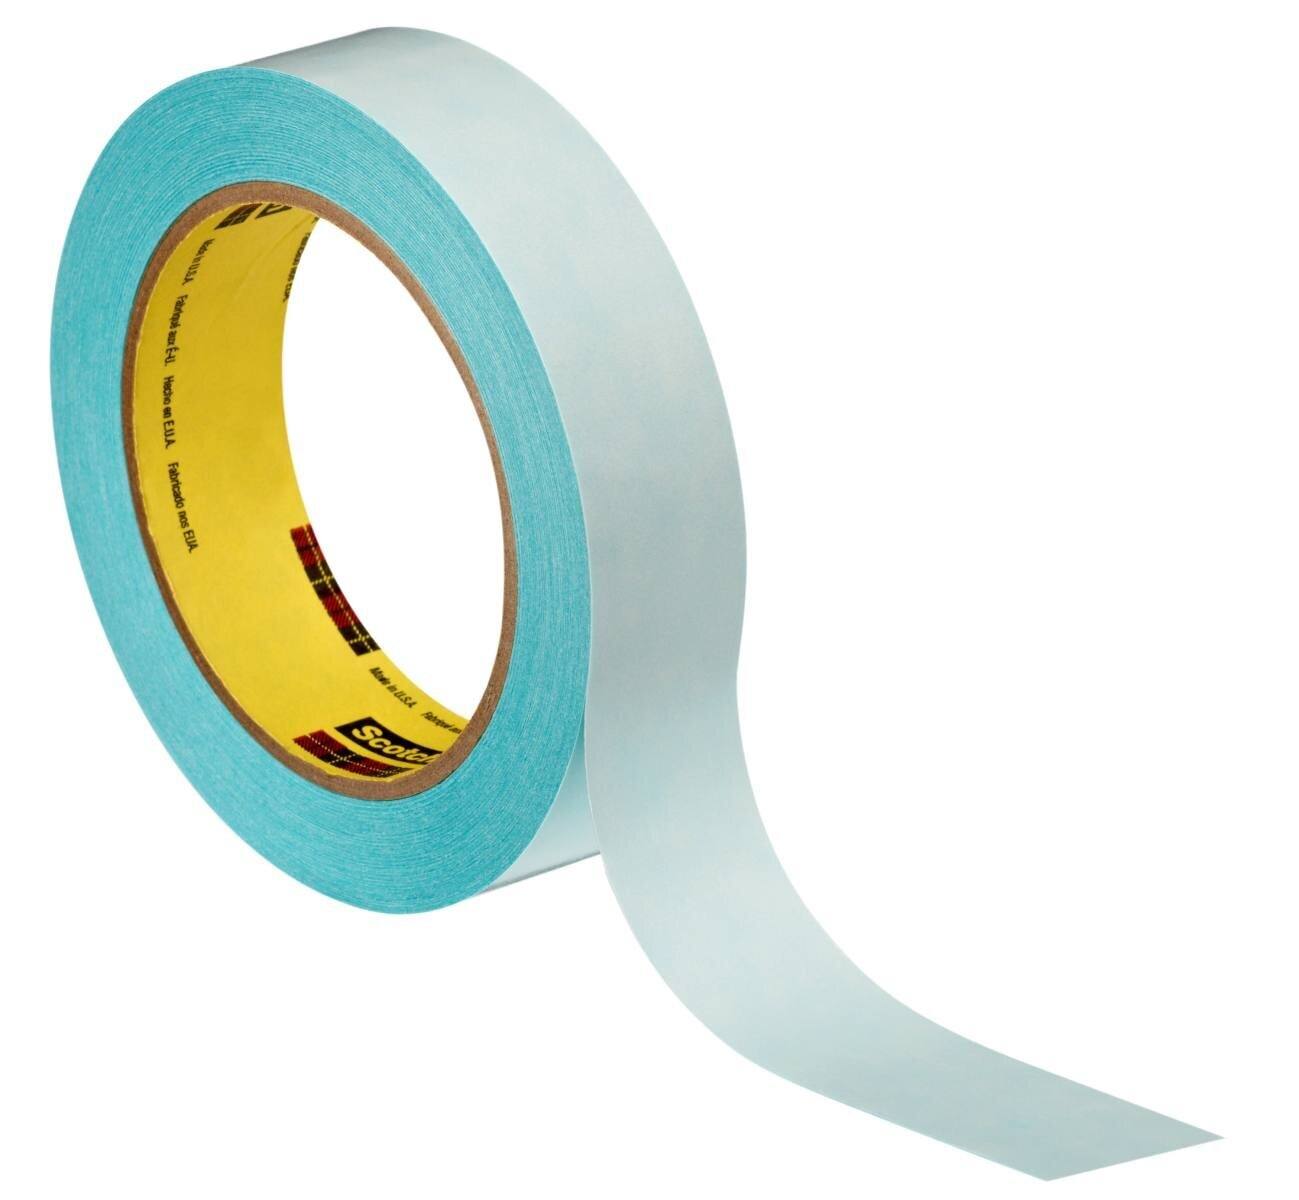 3M Double-sided adhesive tape 913E, blue, 25 mm x 50 m, 0.08 mm